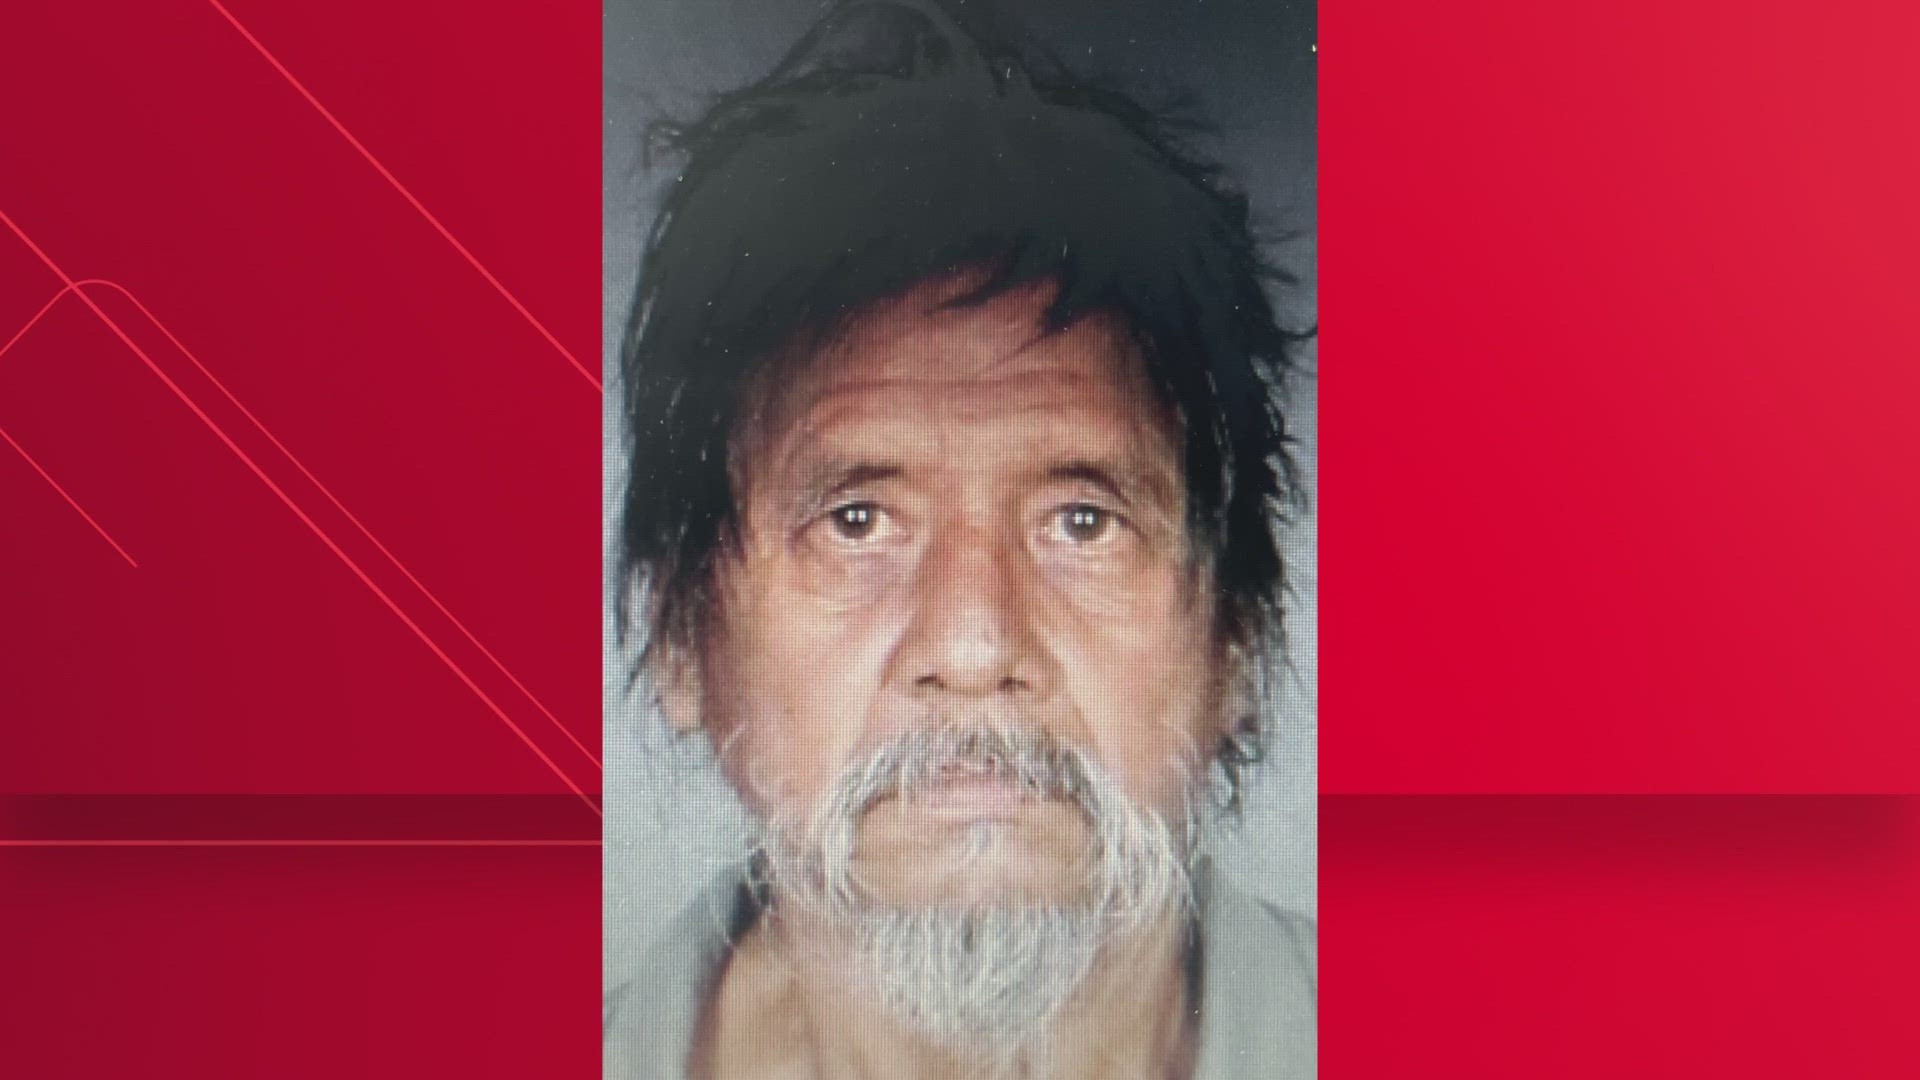 66-year-old Joseph Deloa was reportedly last seen in the 2300 Block of W. Lake Shore Dr.